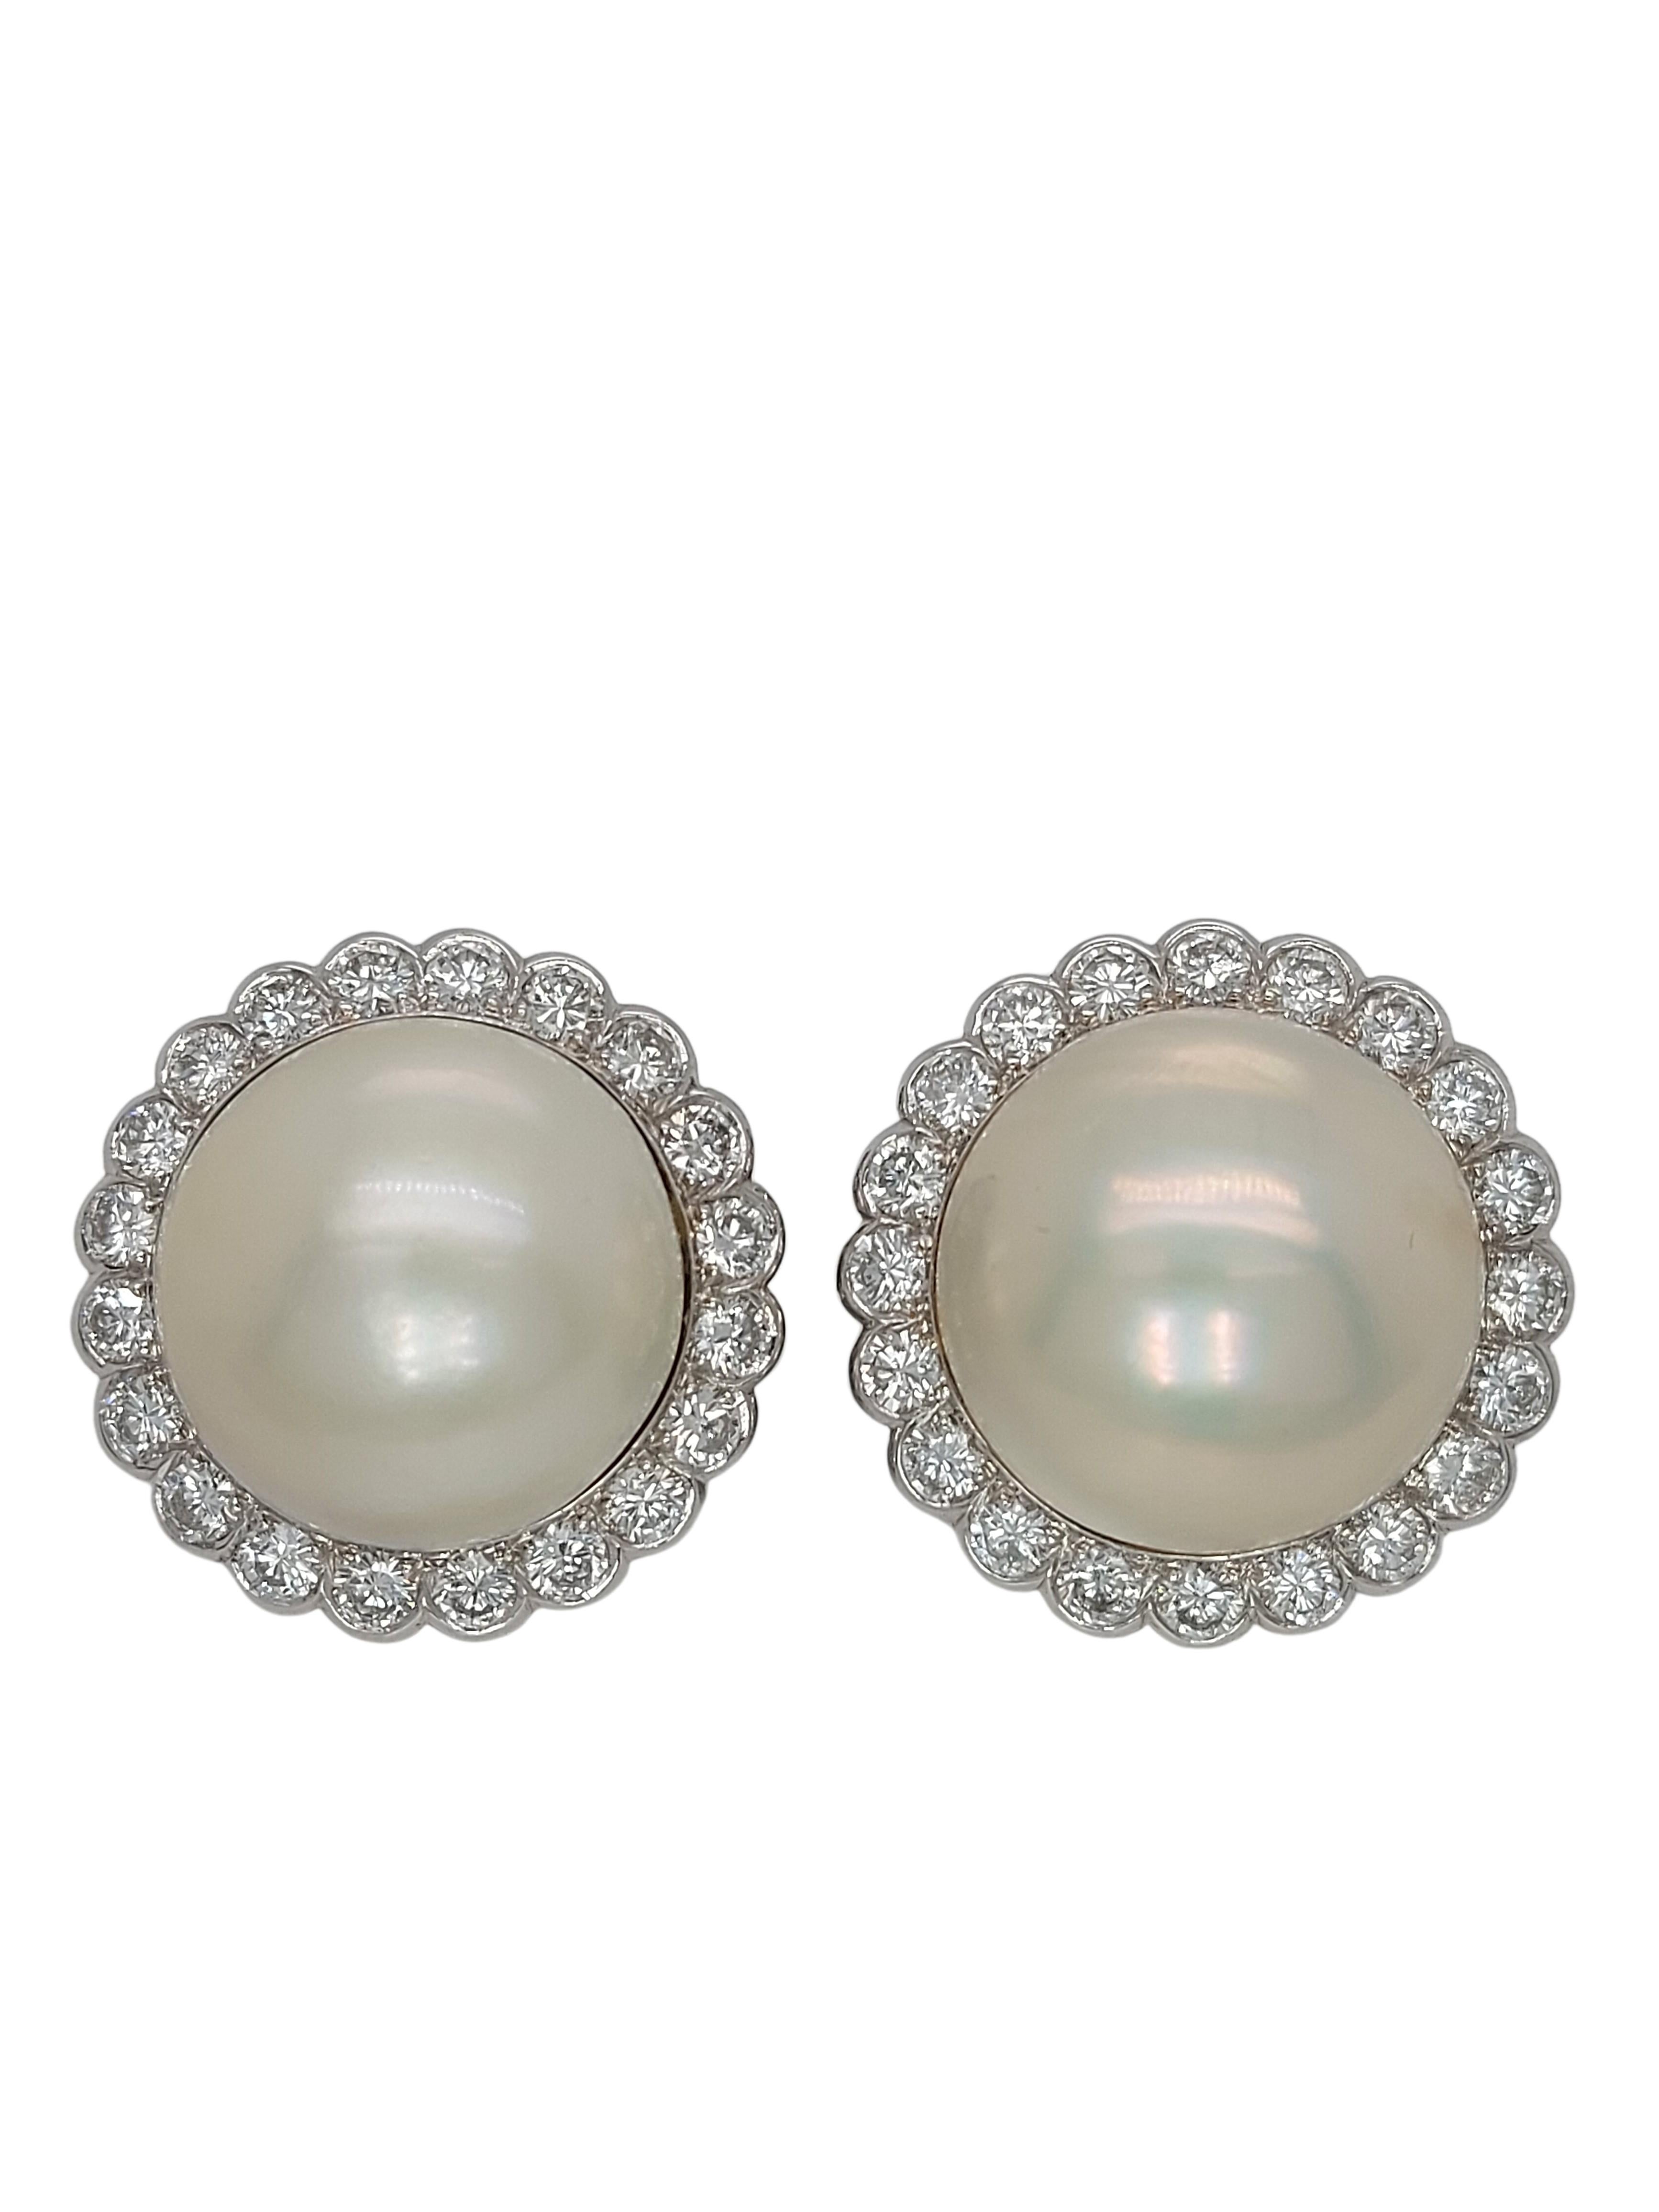 18kt White Gold Mabe Pearl Clip-On Earrings Surrounded with Diamonds For Sale 6